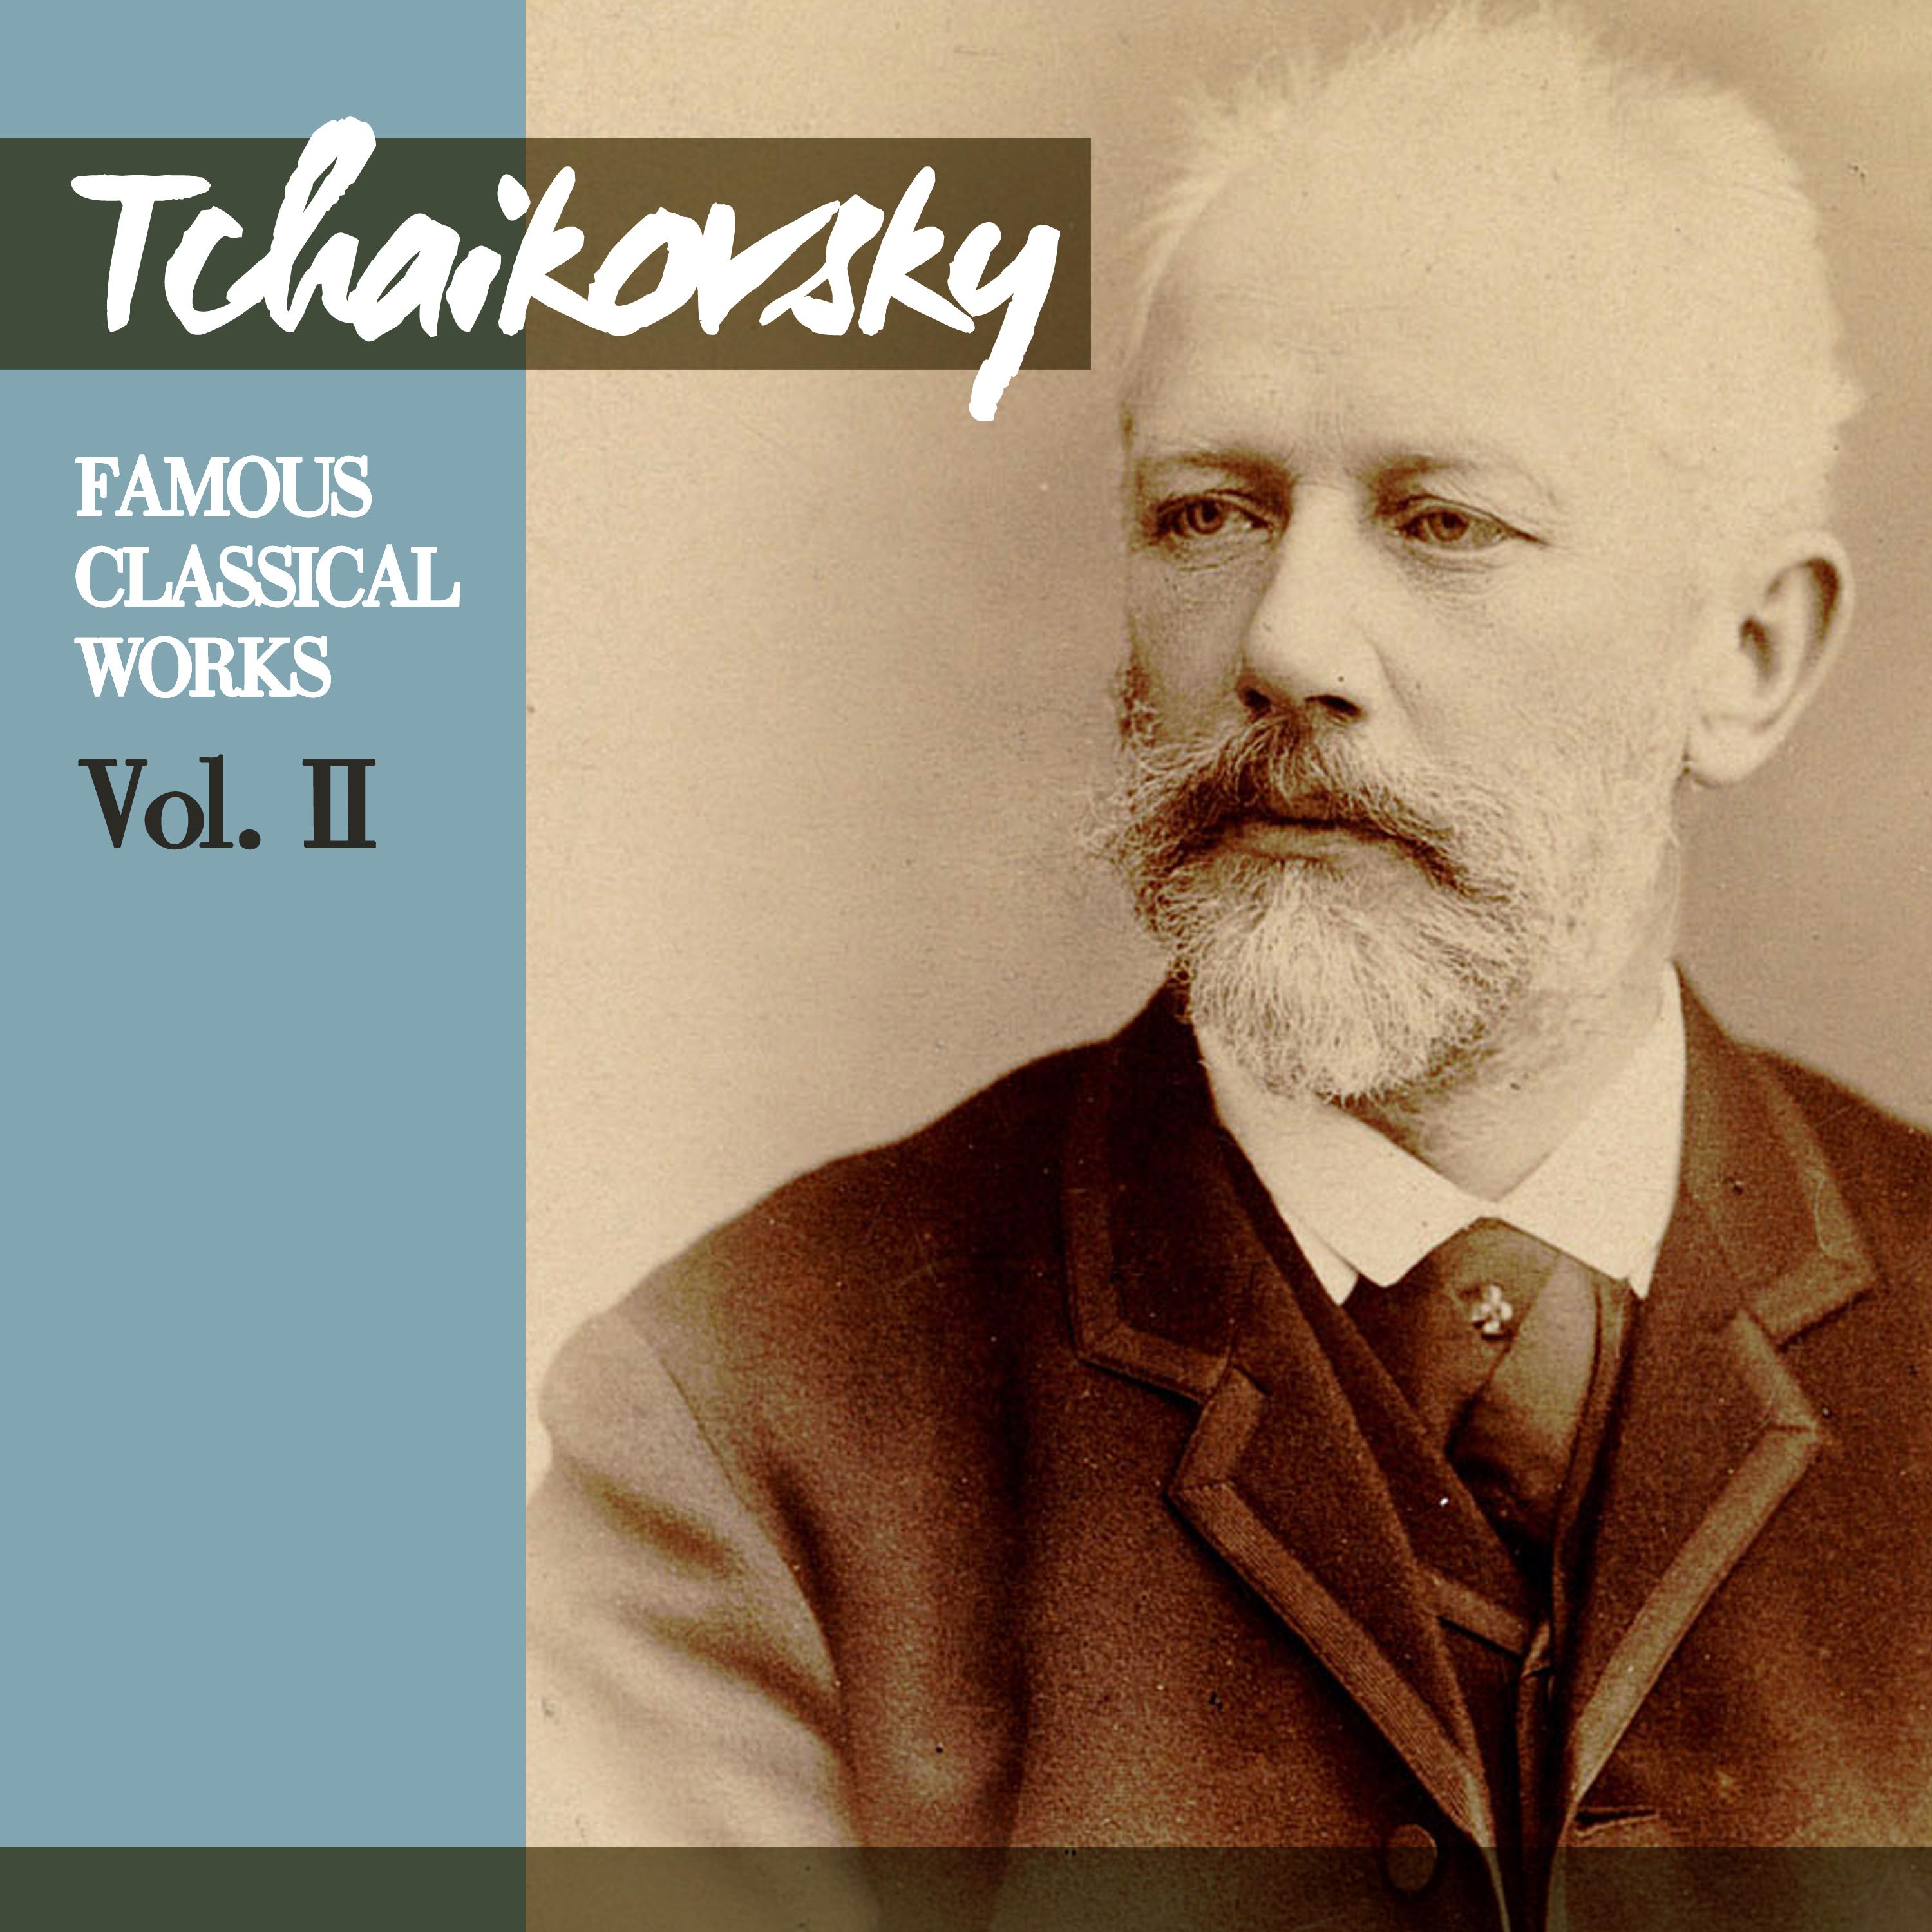 Tchaikovsky: Famous Classical Works, Vol. II